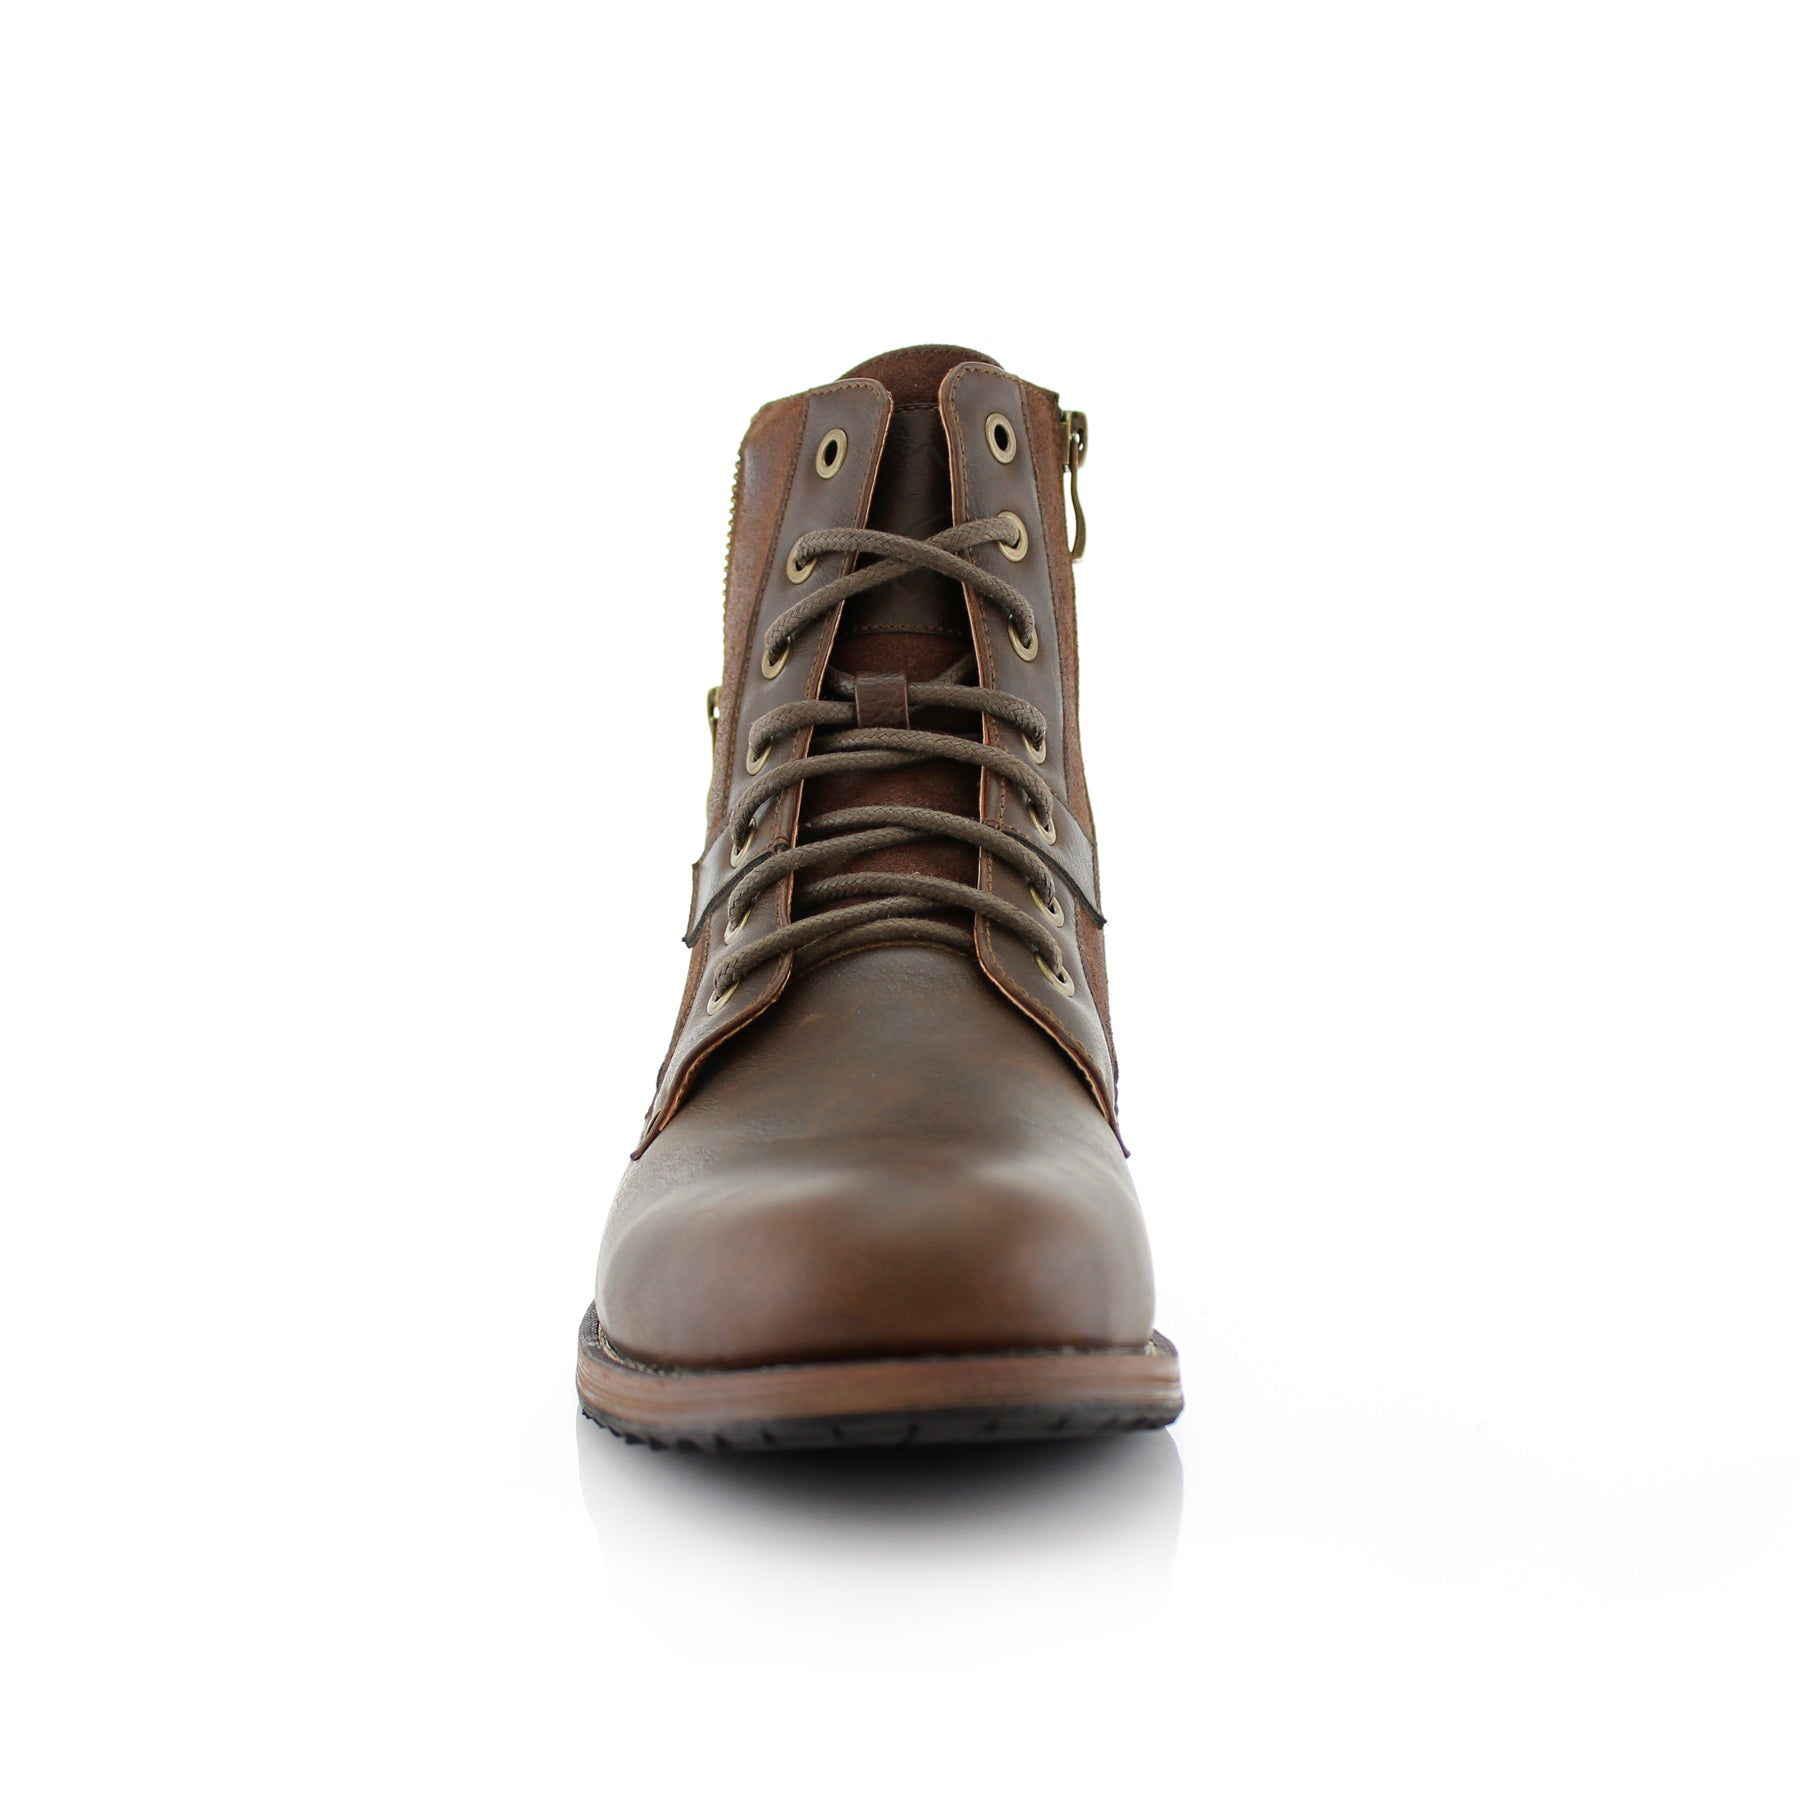 Duo-Textured Zippered Combat Boots | Jalen by Polar Fox | Conal Footwear | Front Angle View